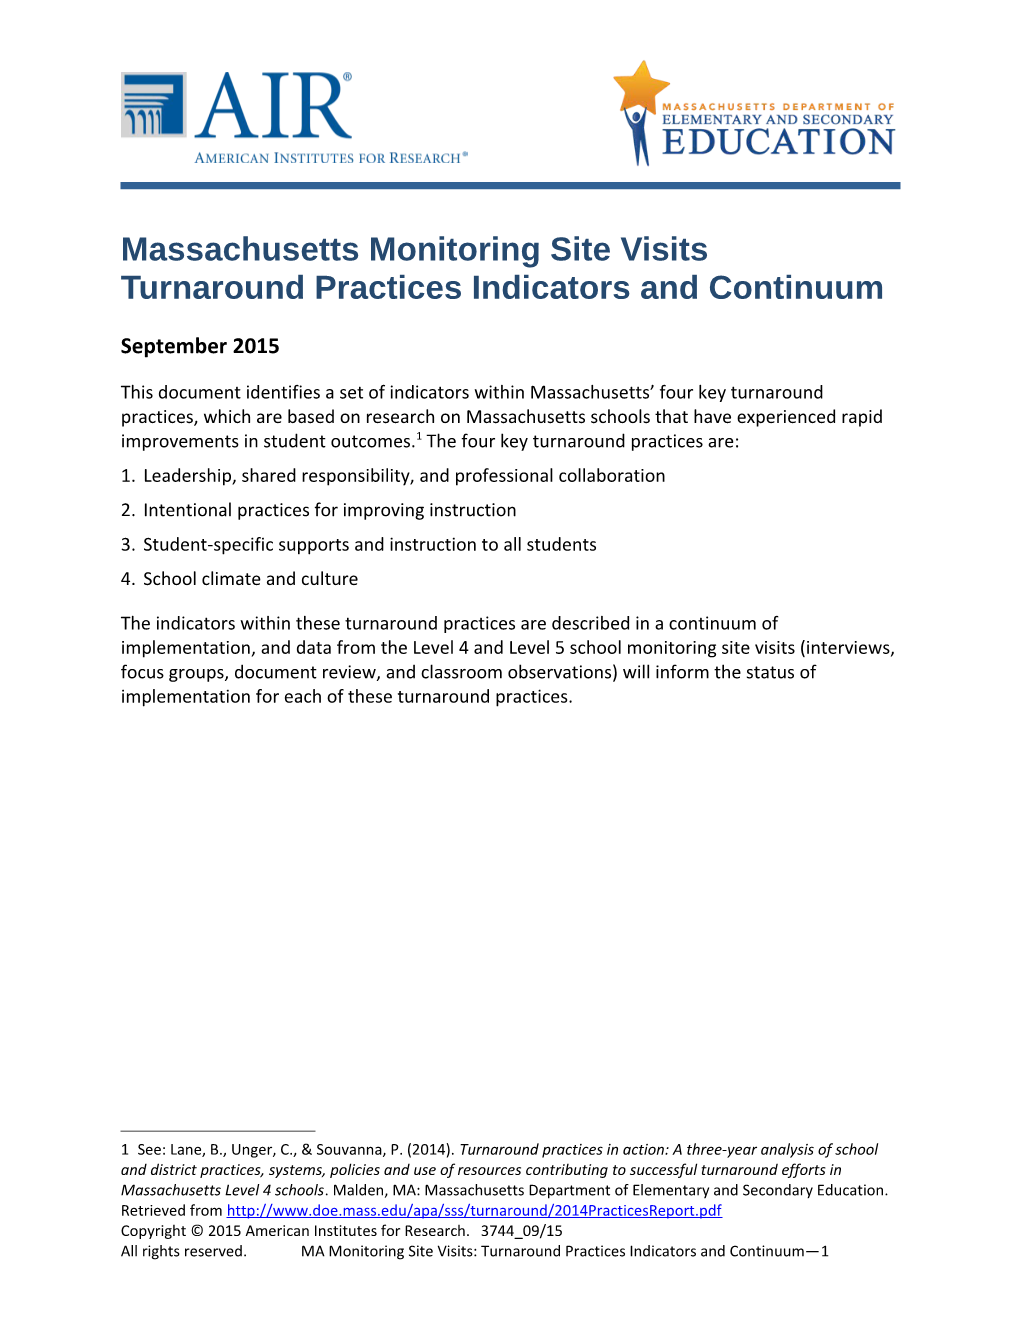 MSV Turnaround Practices and Indicators